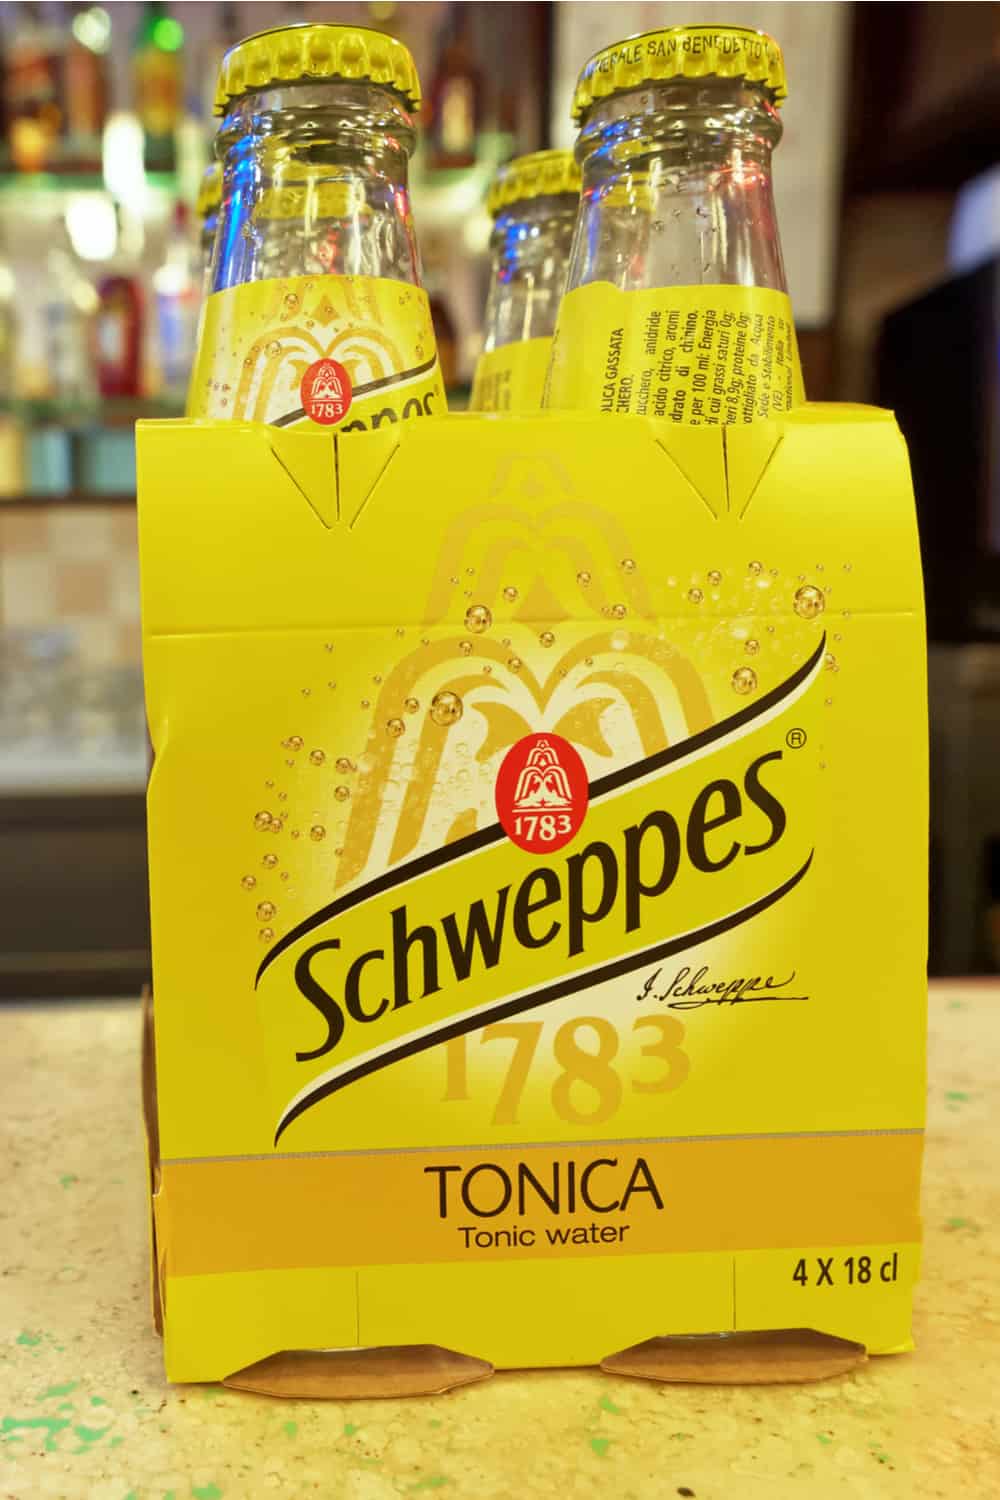 3 Tips To Store Your Tonic Water